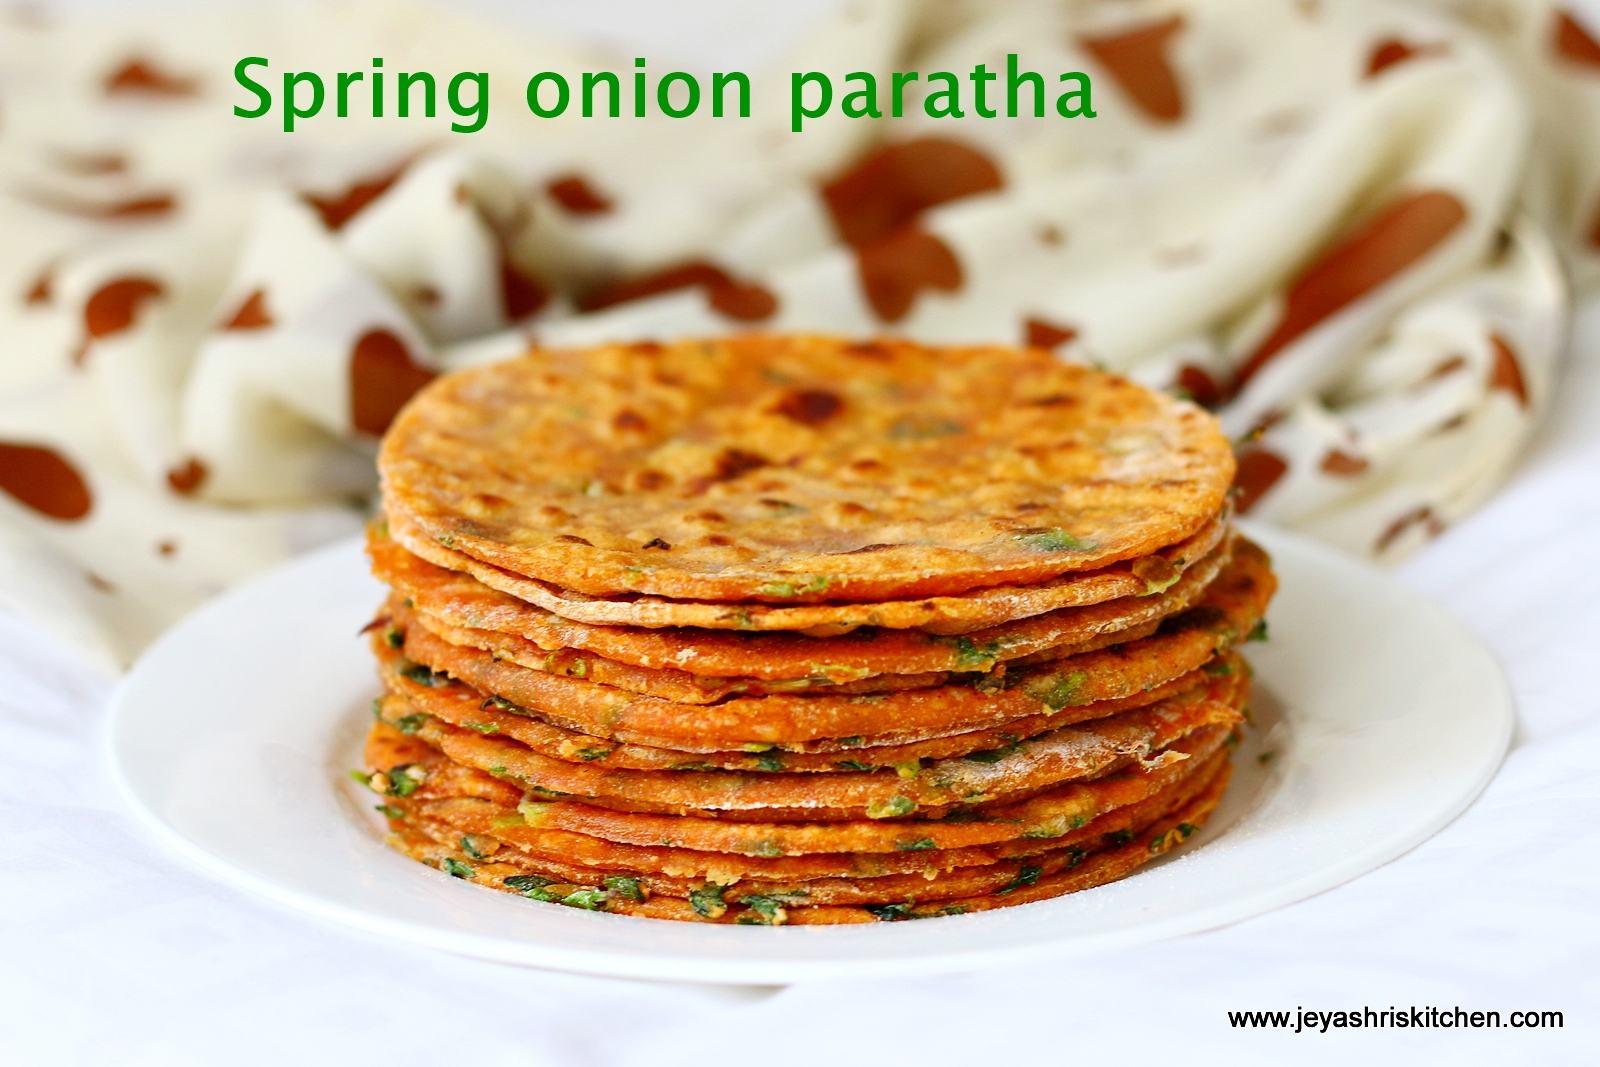 How to make spring onion paratha